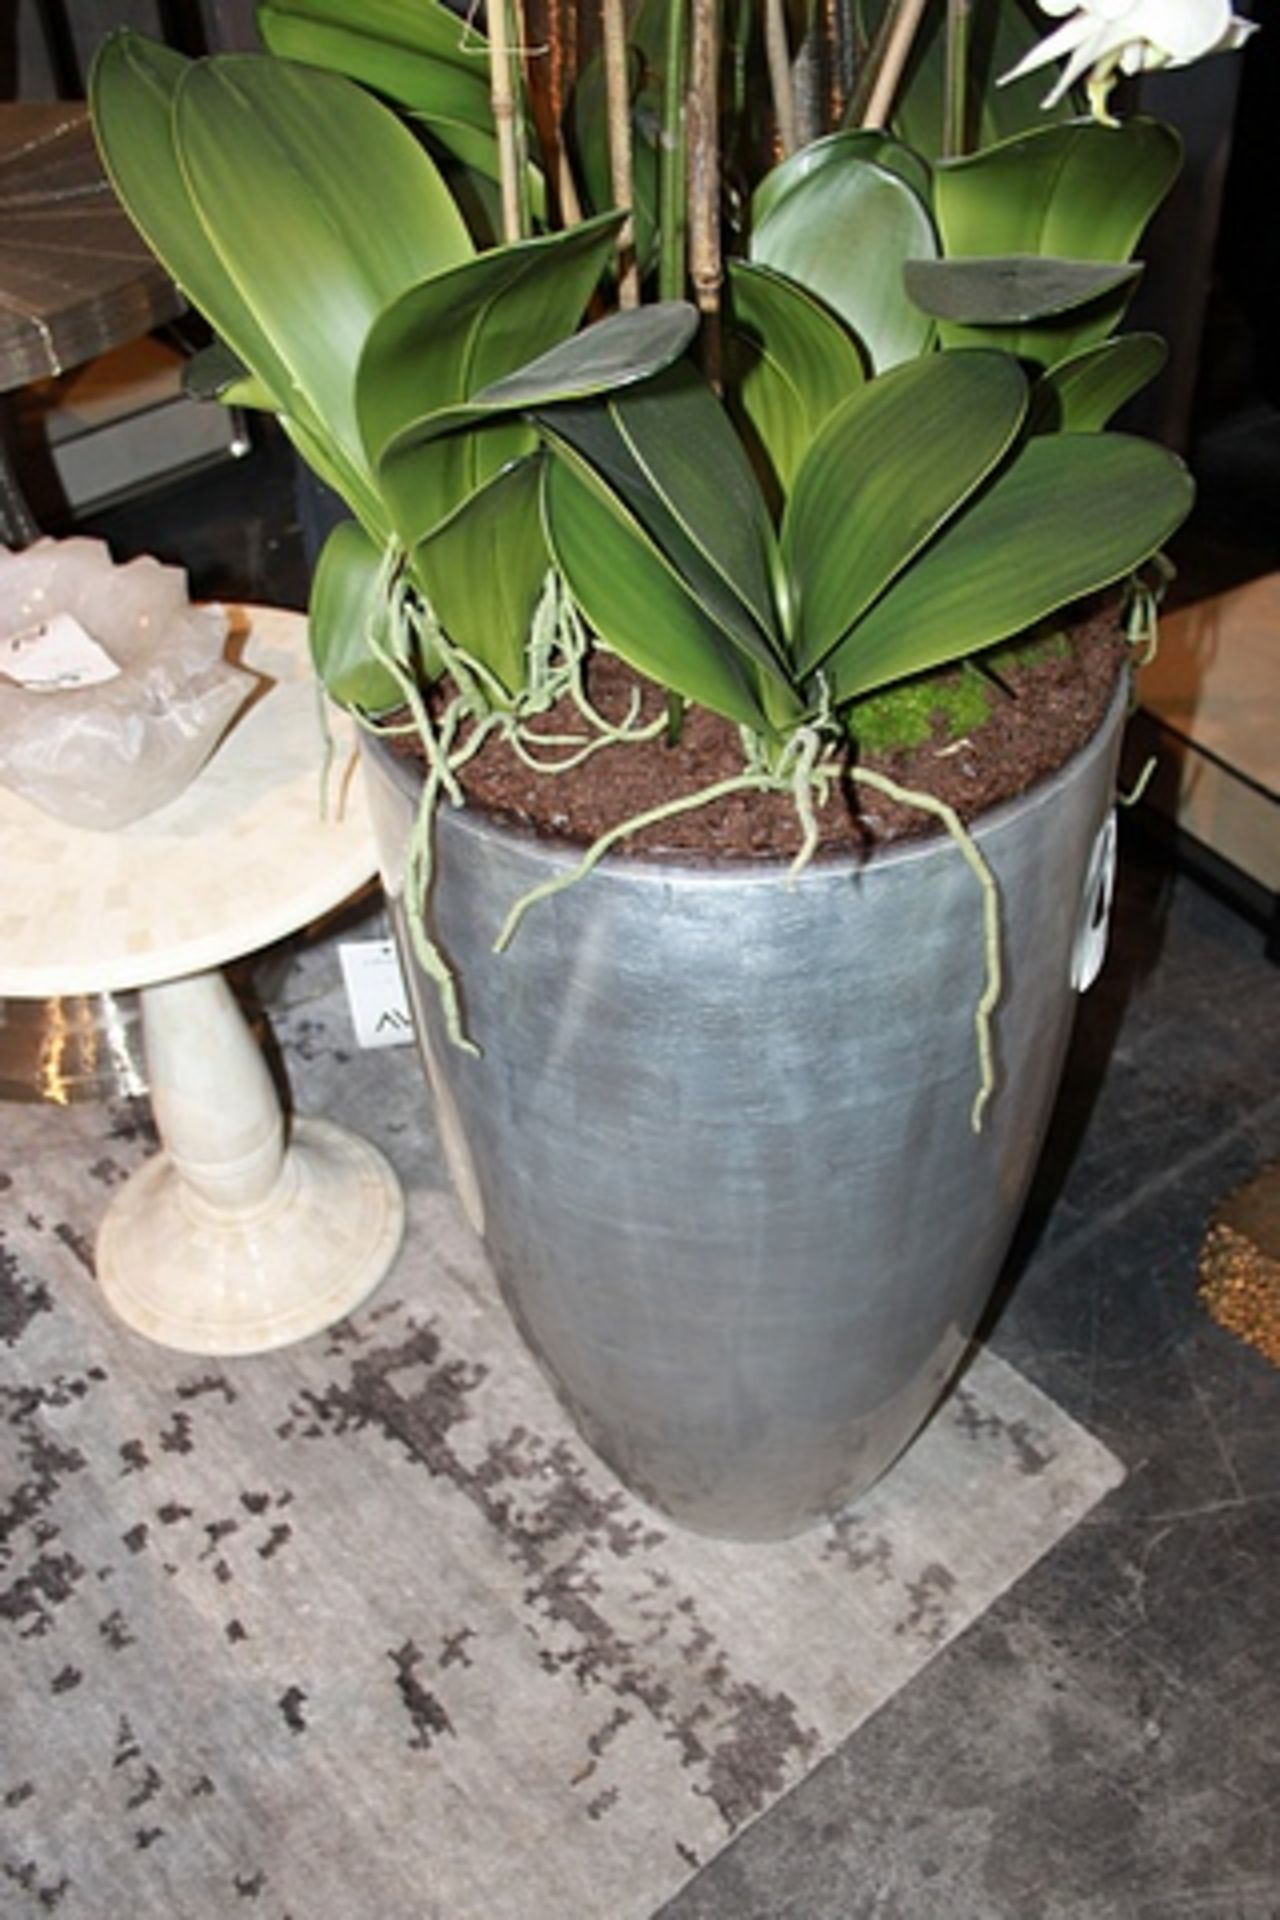 Vase George small silverleaf piece is delicately hand-crafted by artisans exquisite artistic - Image 2 of 2